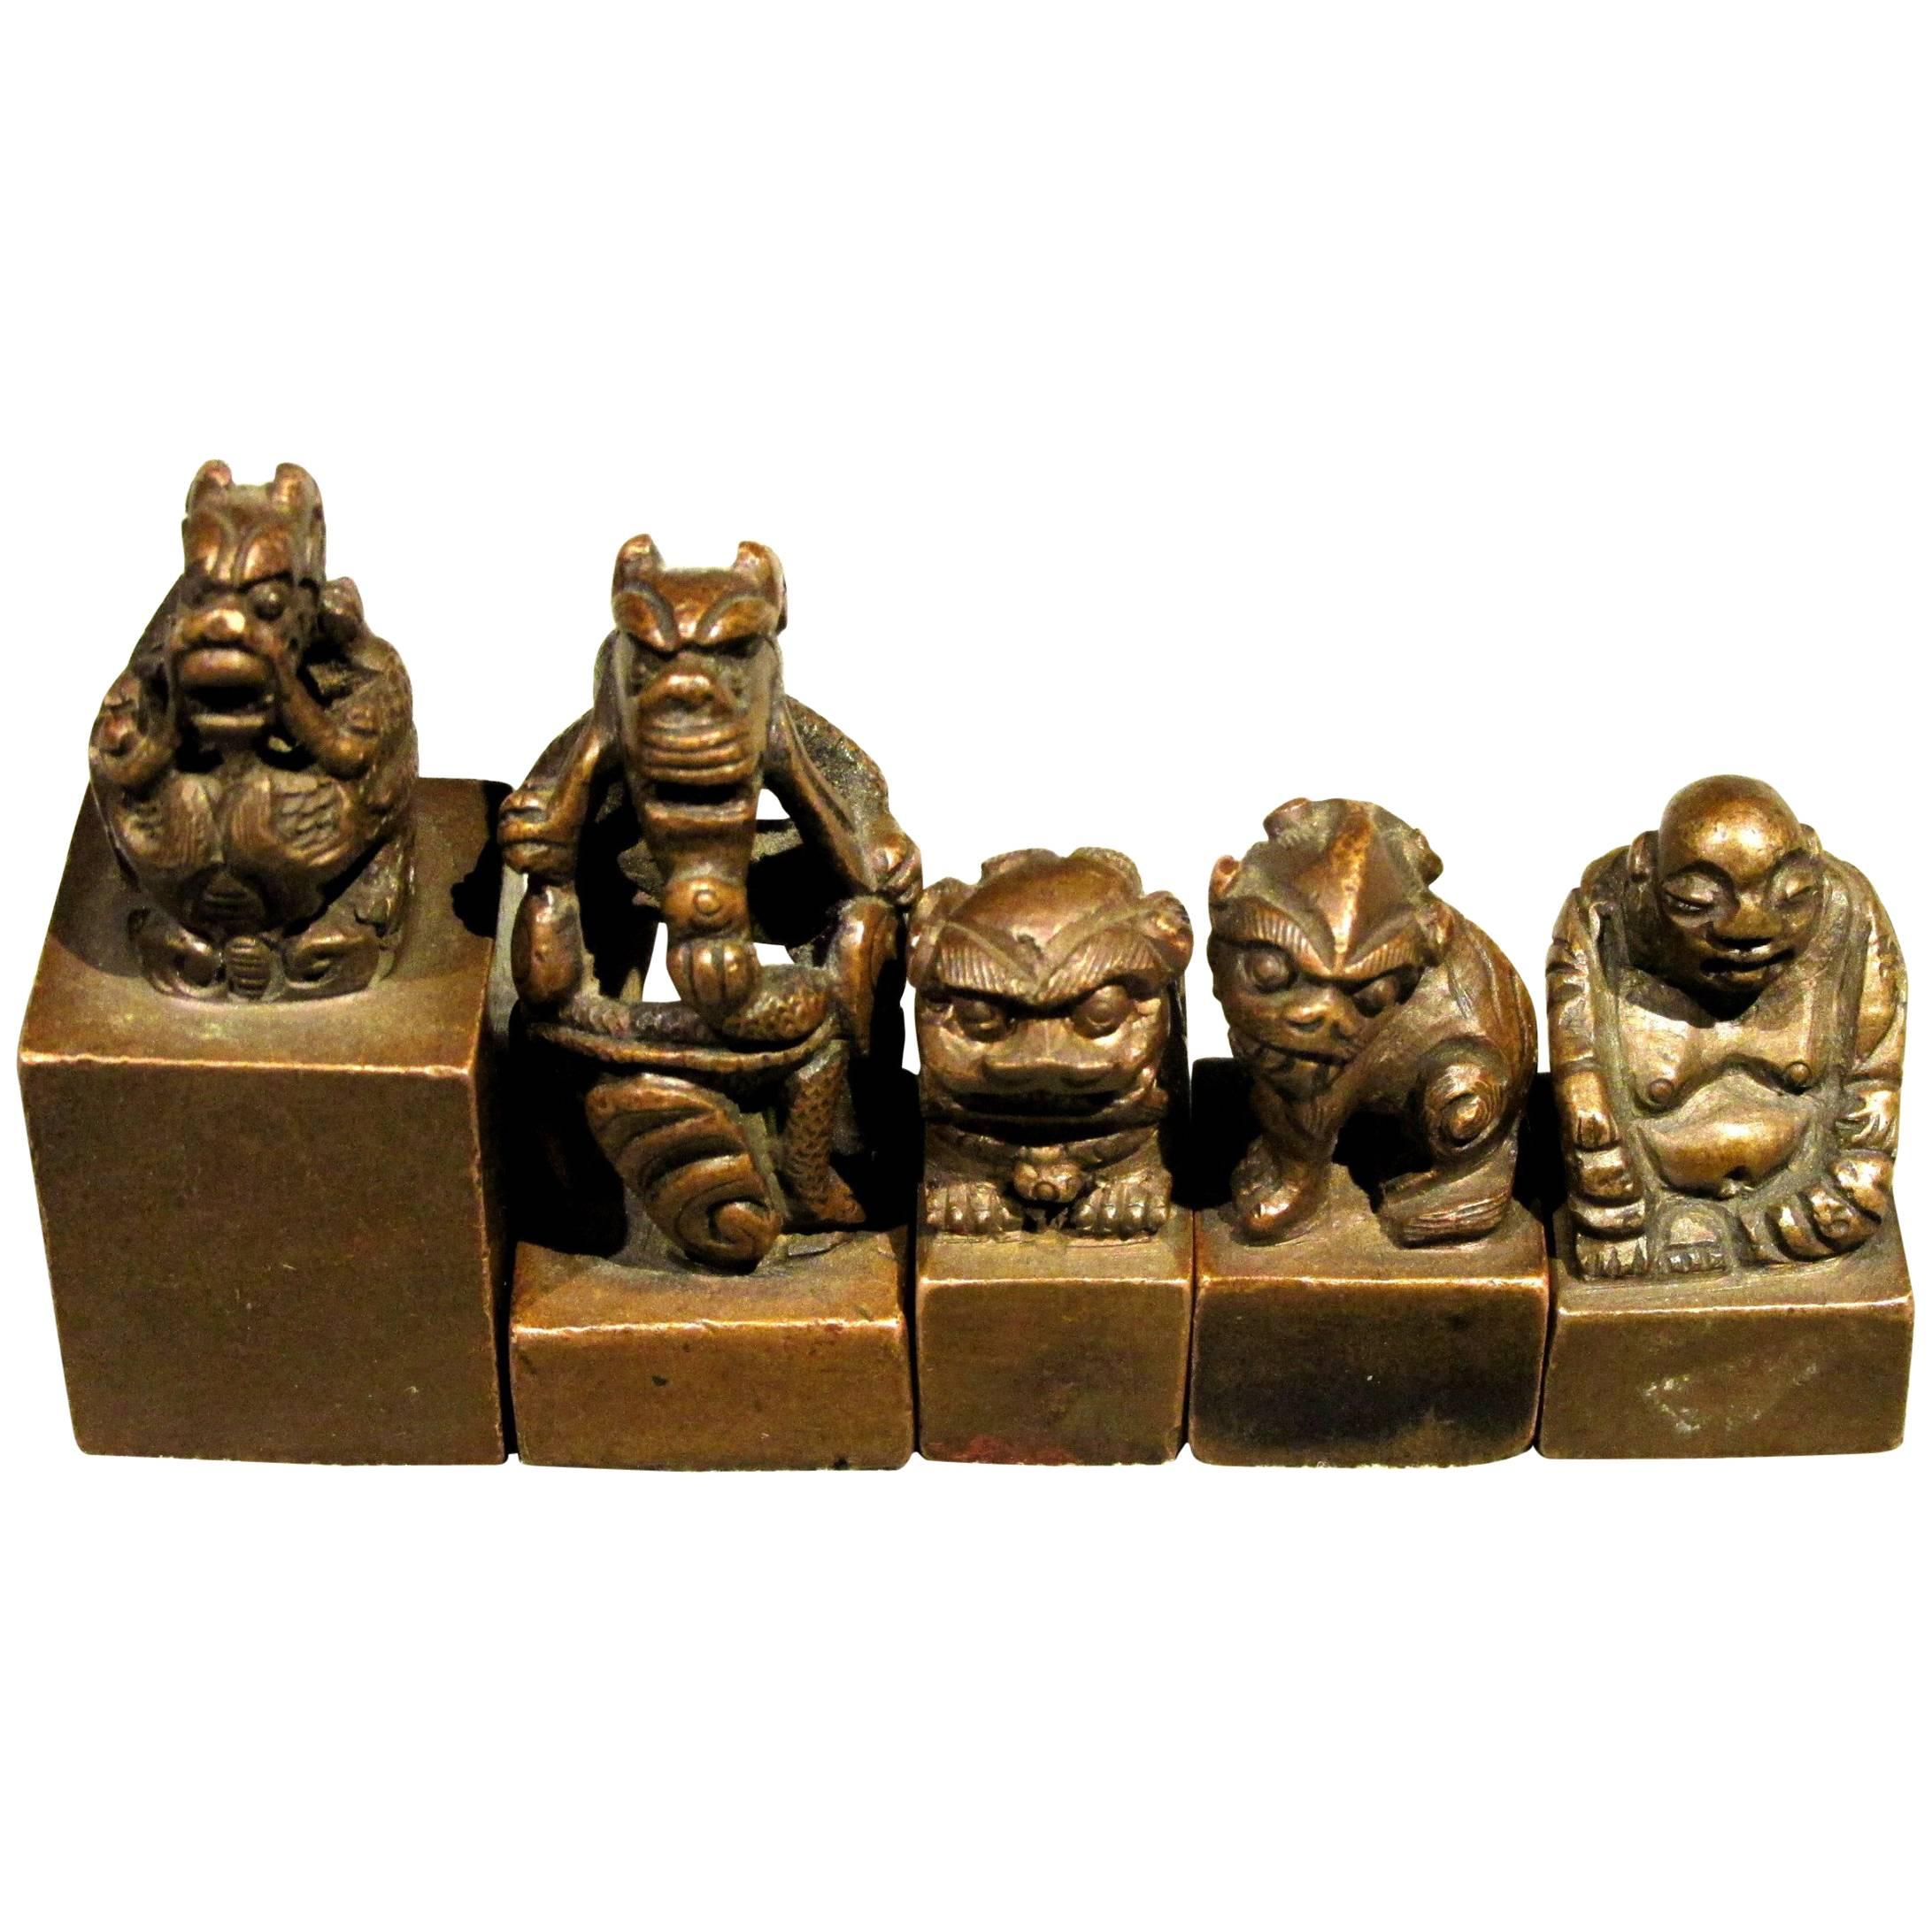 Group of Five Miniature Chinese Bronze Seals / Chops, Late Qing Period